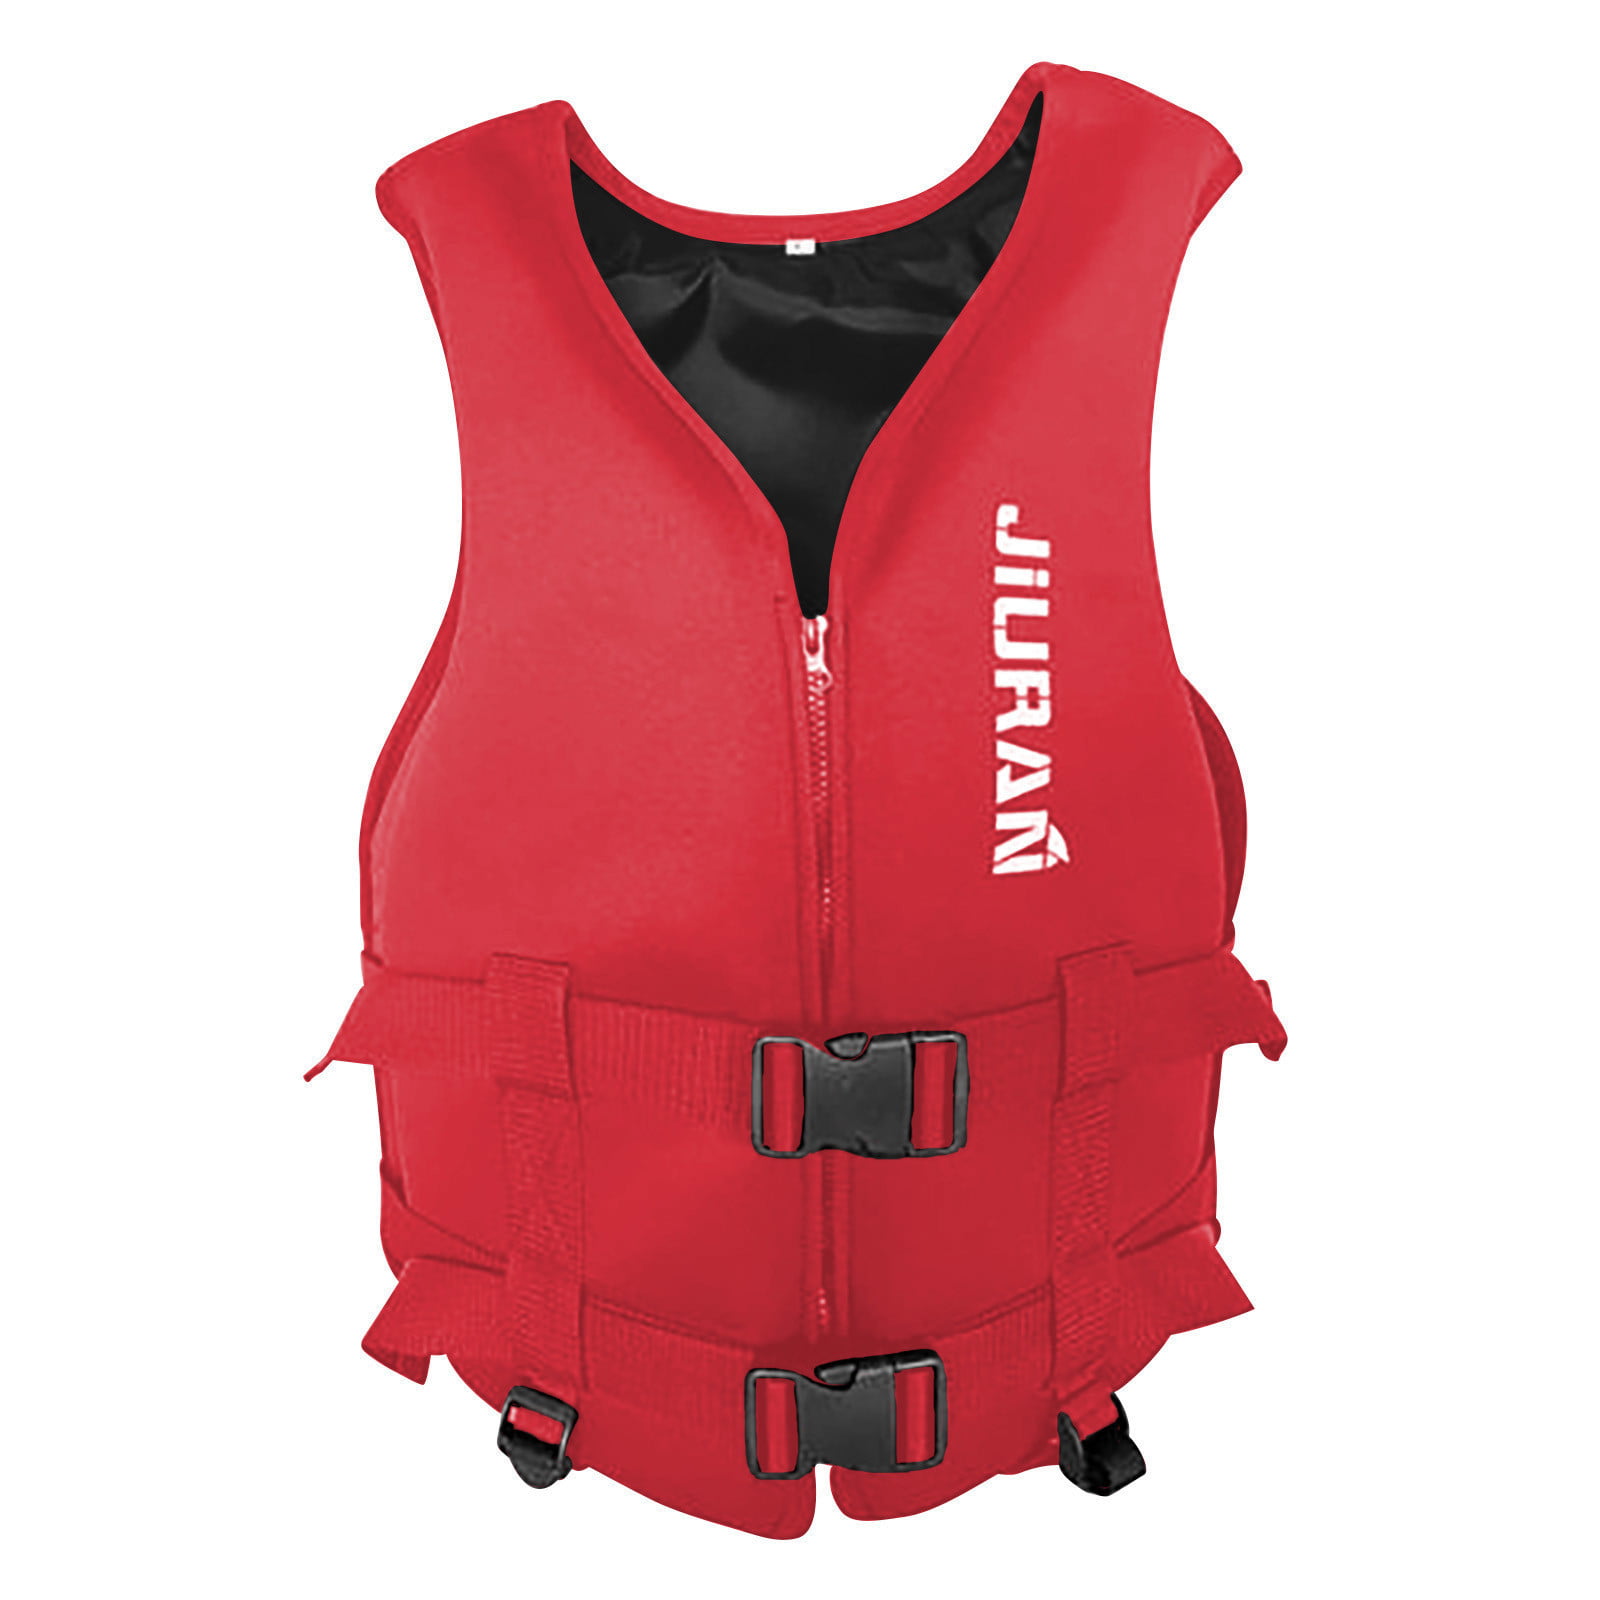 Surfing Kayaking 20-100KG Rafting ZooTng Life Jacket Adult Adjustable Safety Breathable Buoyancy Aid for Men And Women Swimming Vest for Fishing